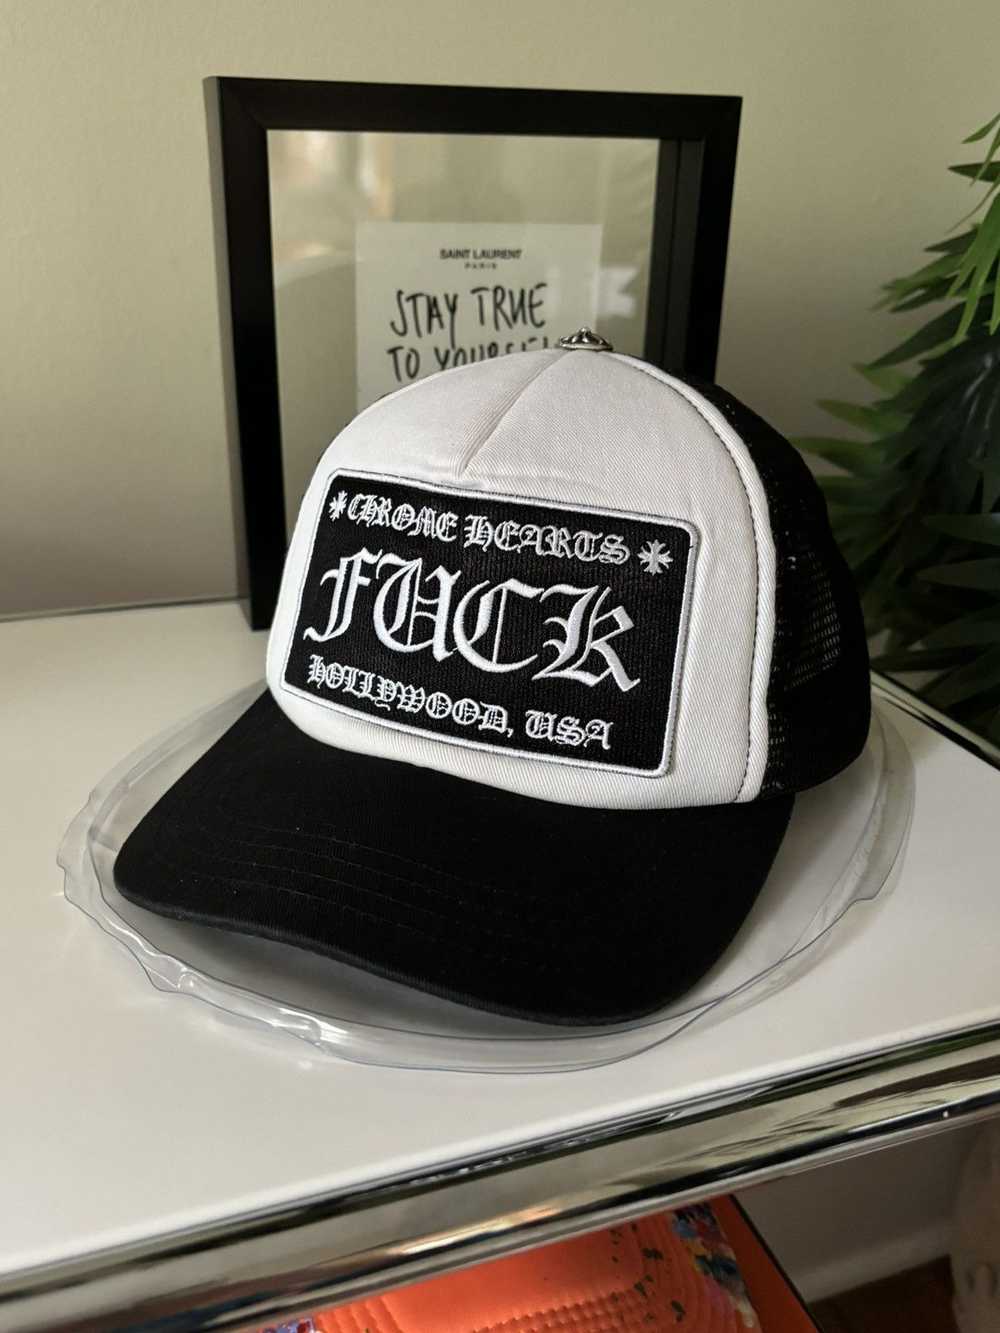 Chrome Hearts “FUCK” HOLLYWOOD VINTAGE TRUCKER HAT - image 3